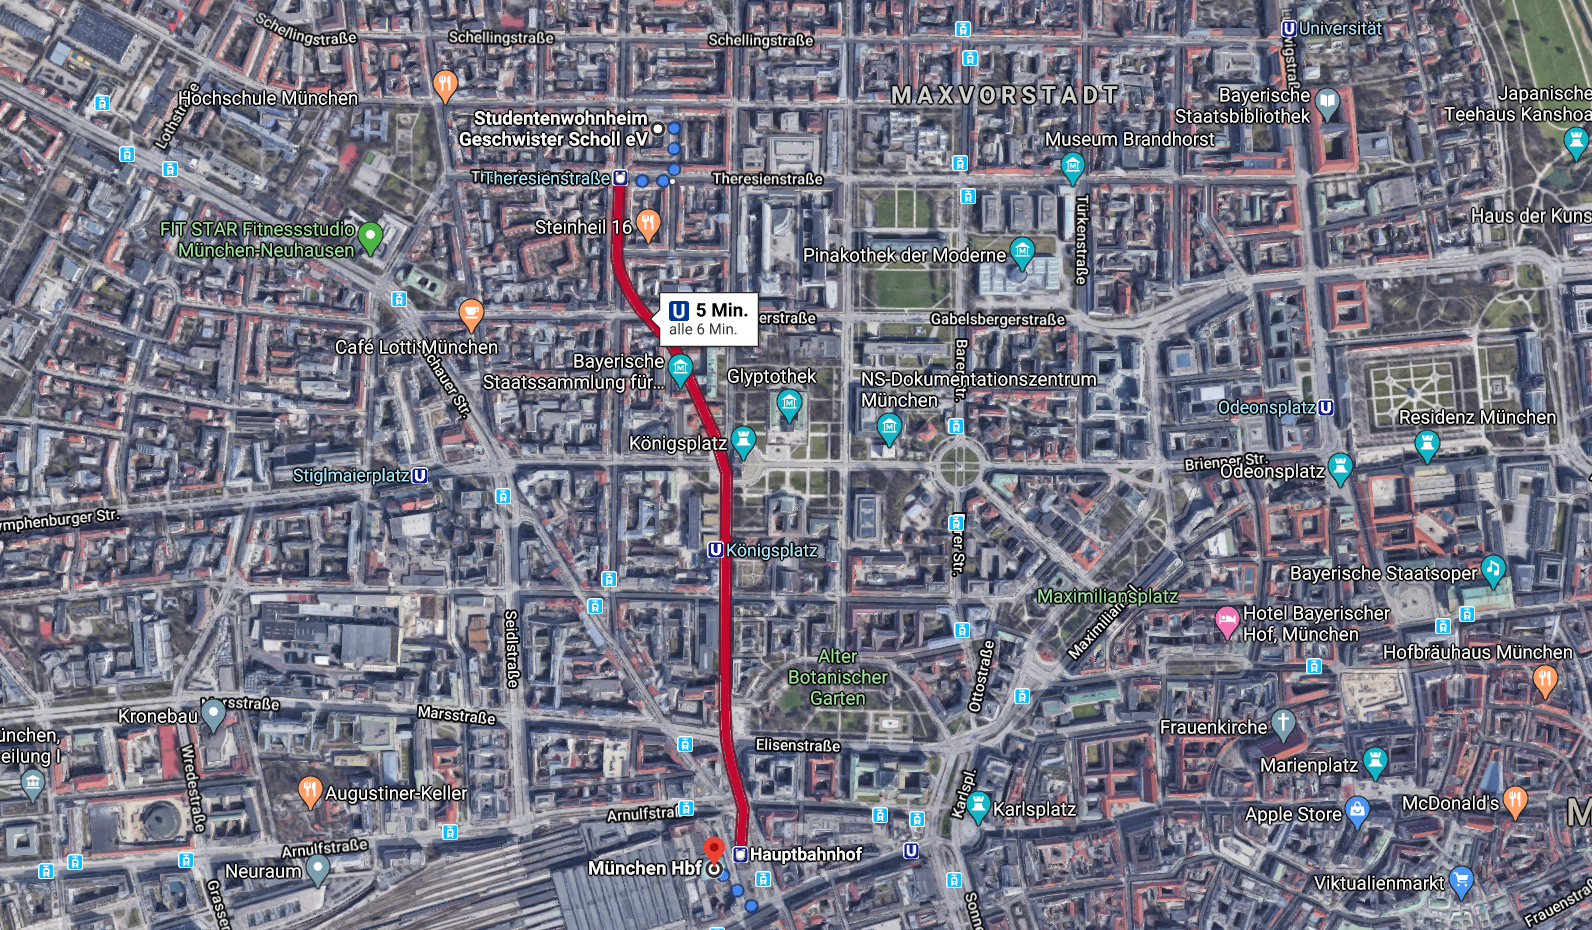 Route from Schollheim to the main station with U2